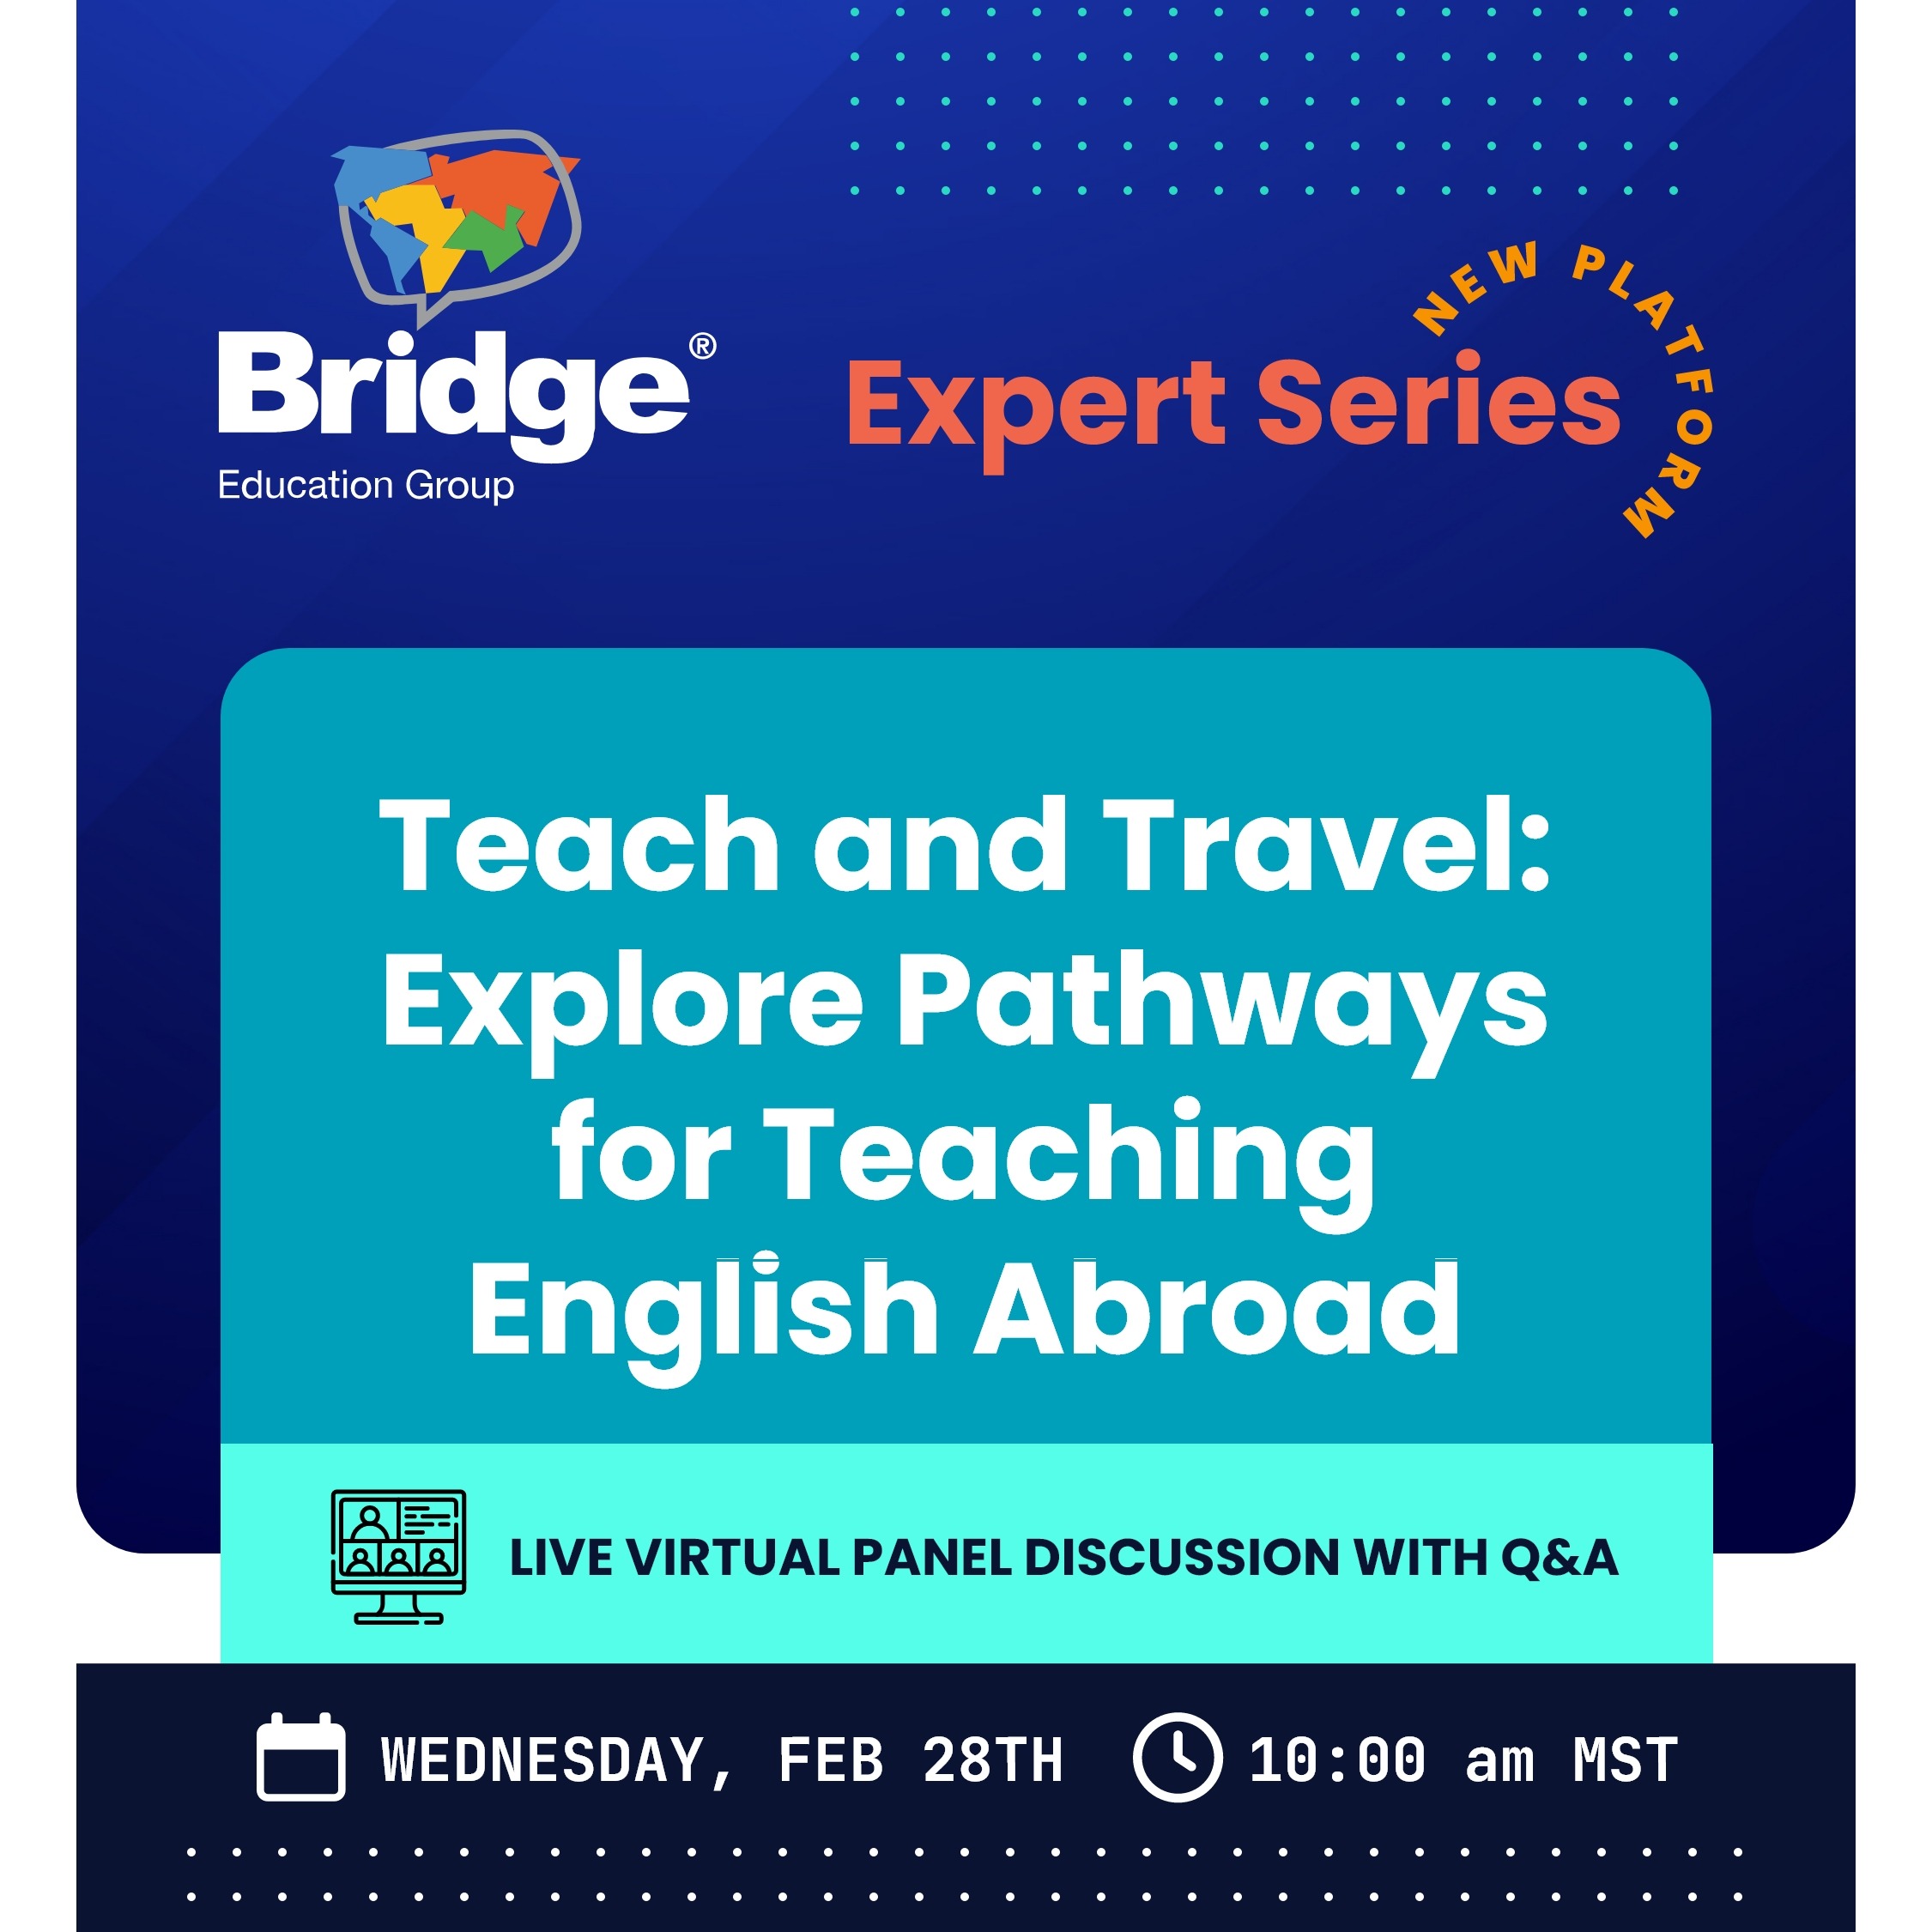 teach and travel, explore pathways for teaching english abroad with time and date